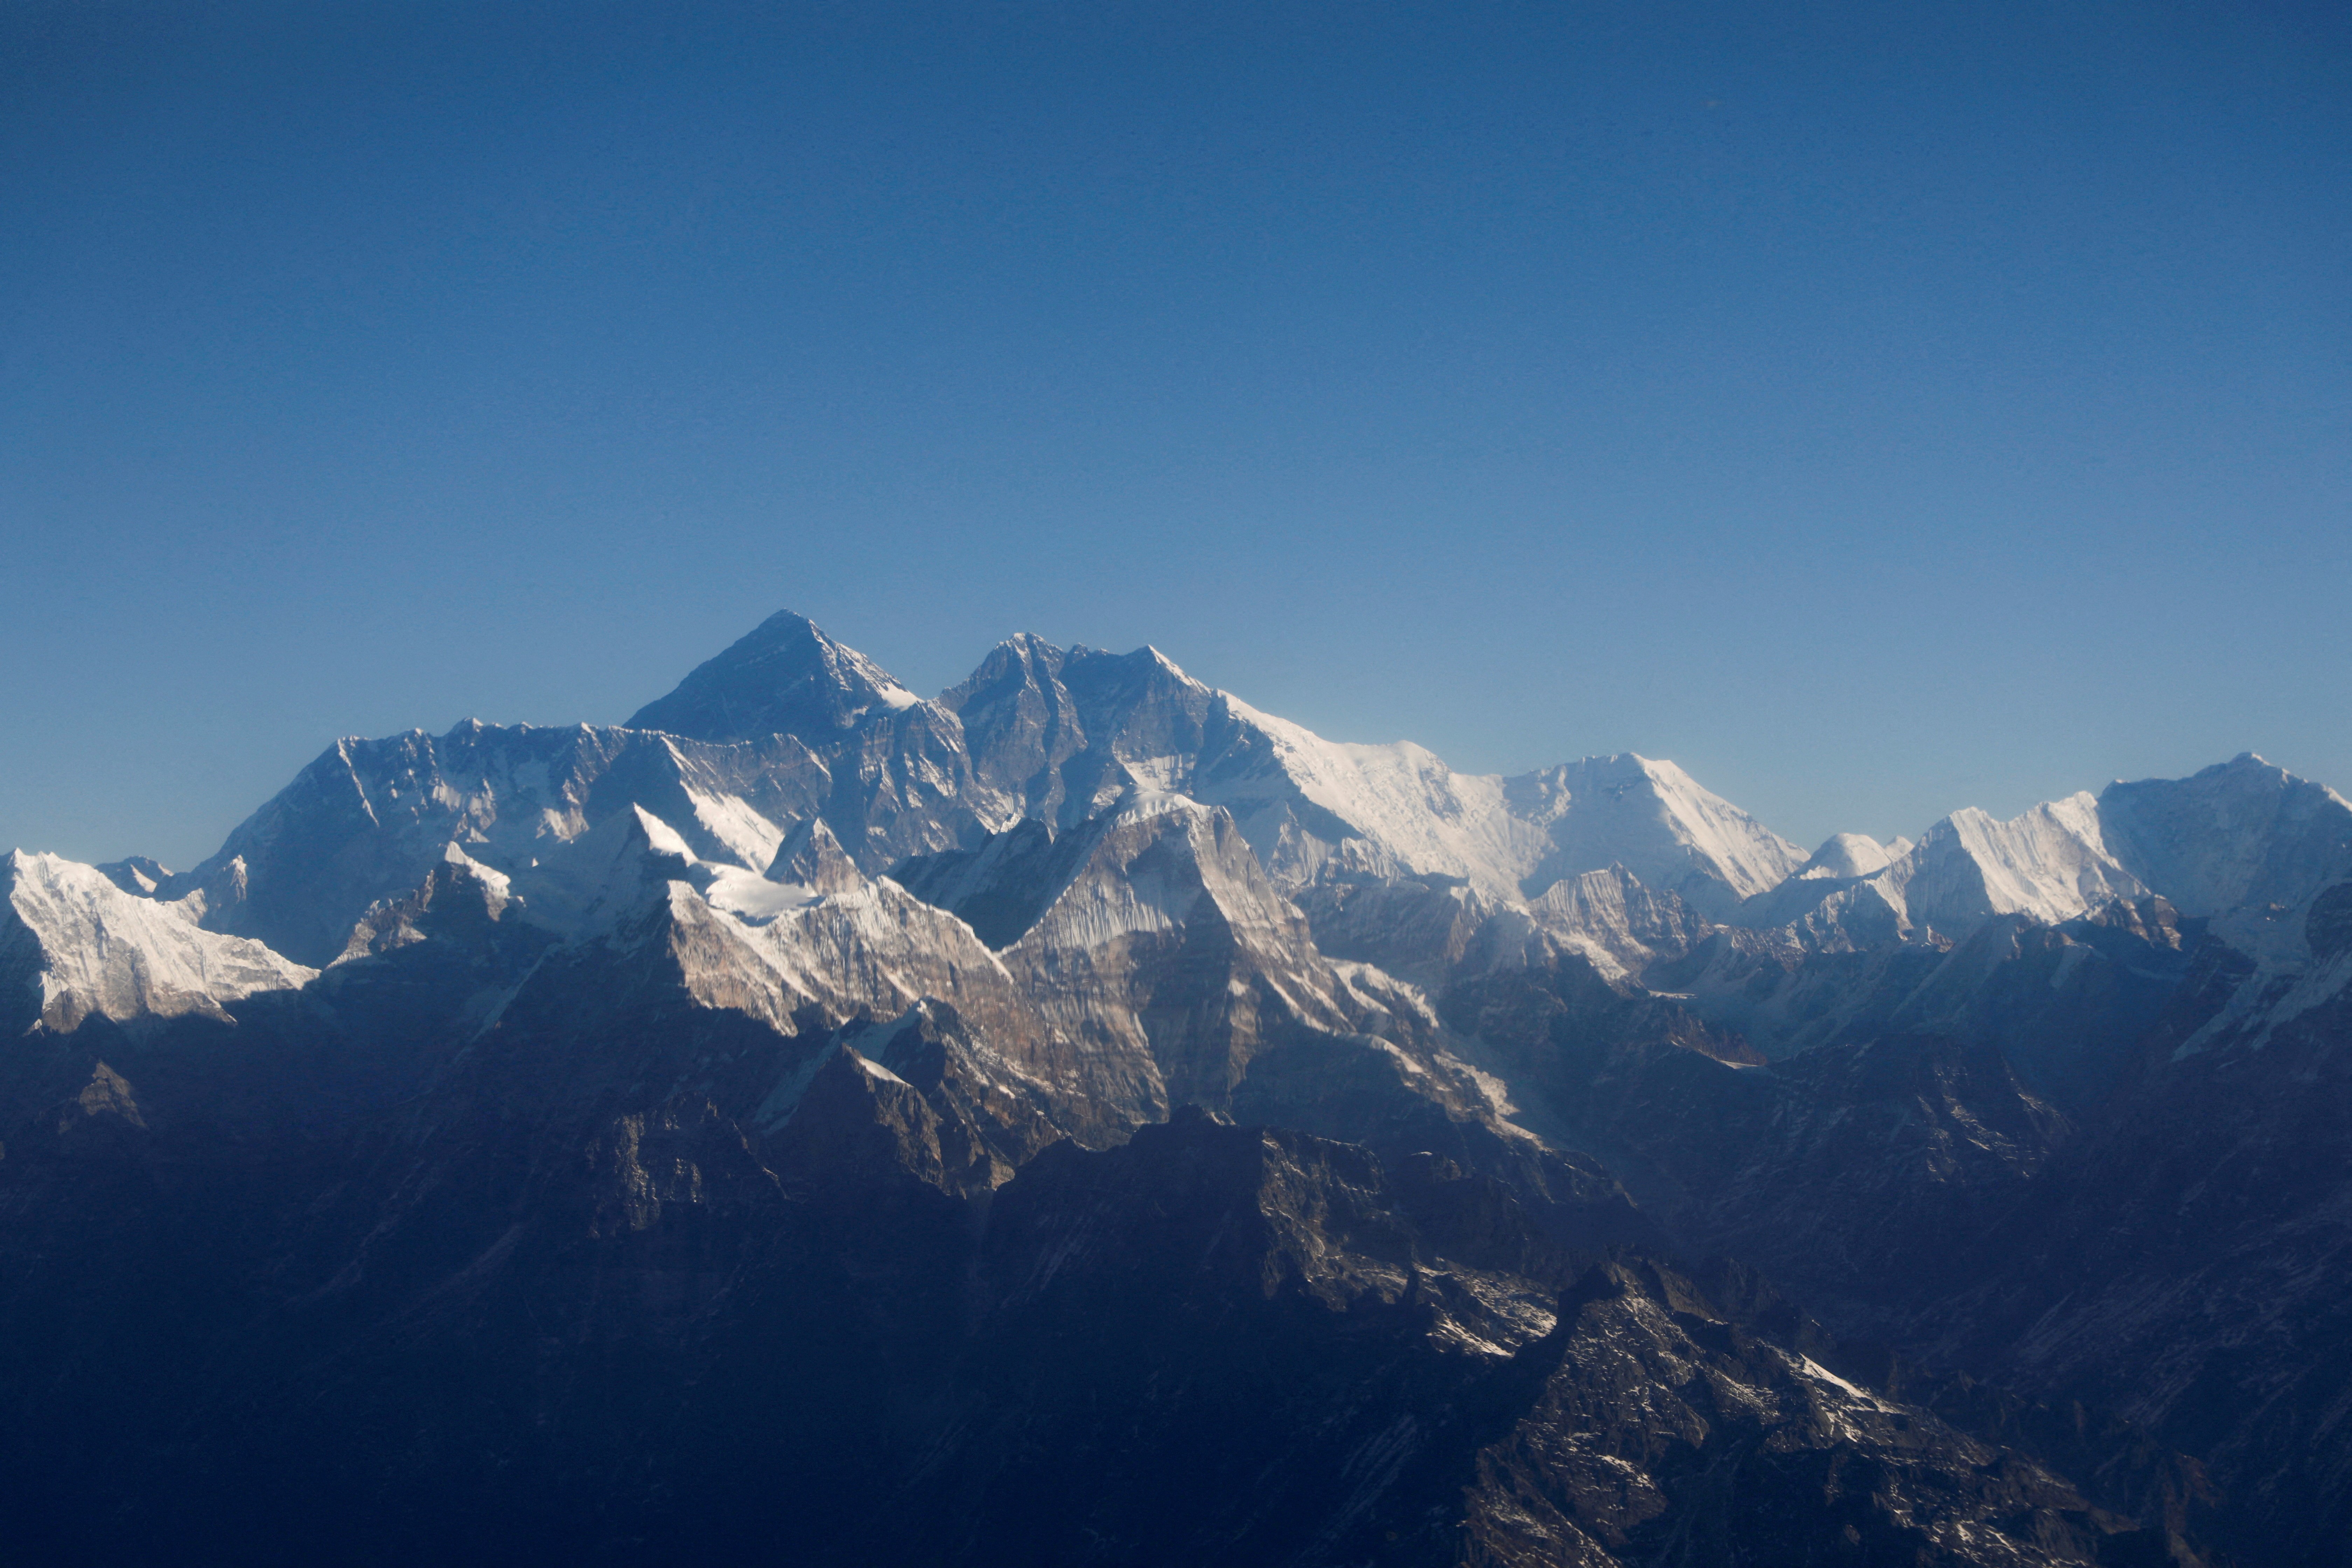 Mount Everest, the world highest peak, and other peaks of the Himalayan range are seen through an aircraft window during a mountain flight from Kathmandu, Nepal January 15, 2020. Photo: Reuters